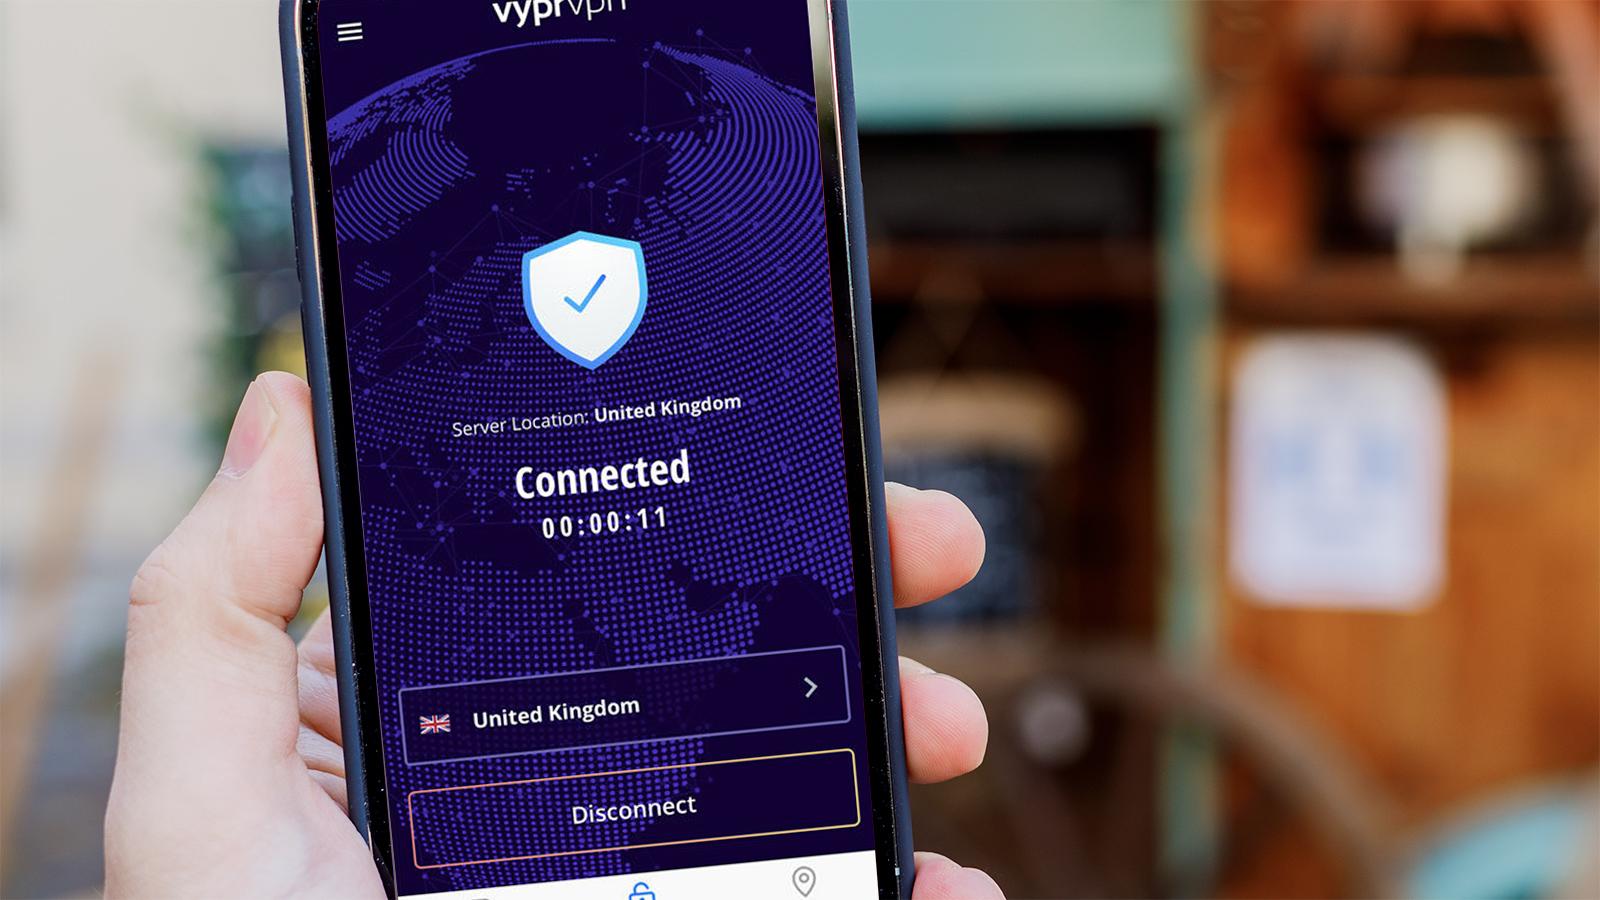   VyprVPN - Best for Owned & Operated Servers